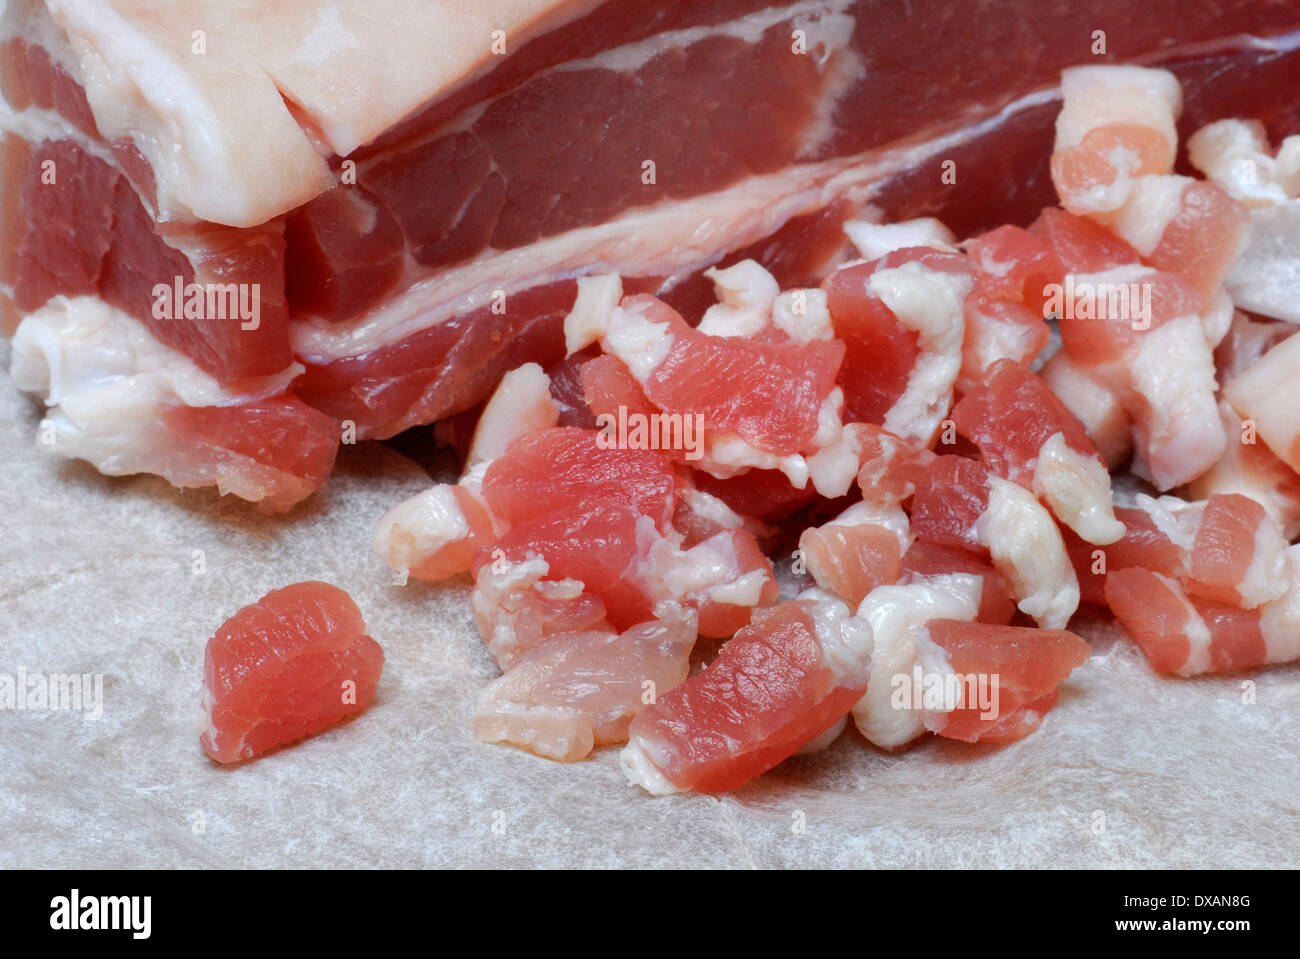 Cured Bacon Stock Photo